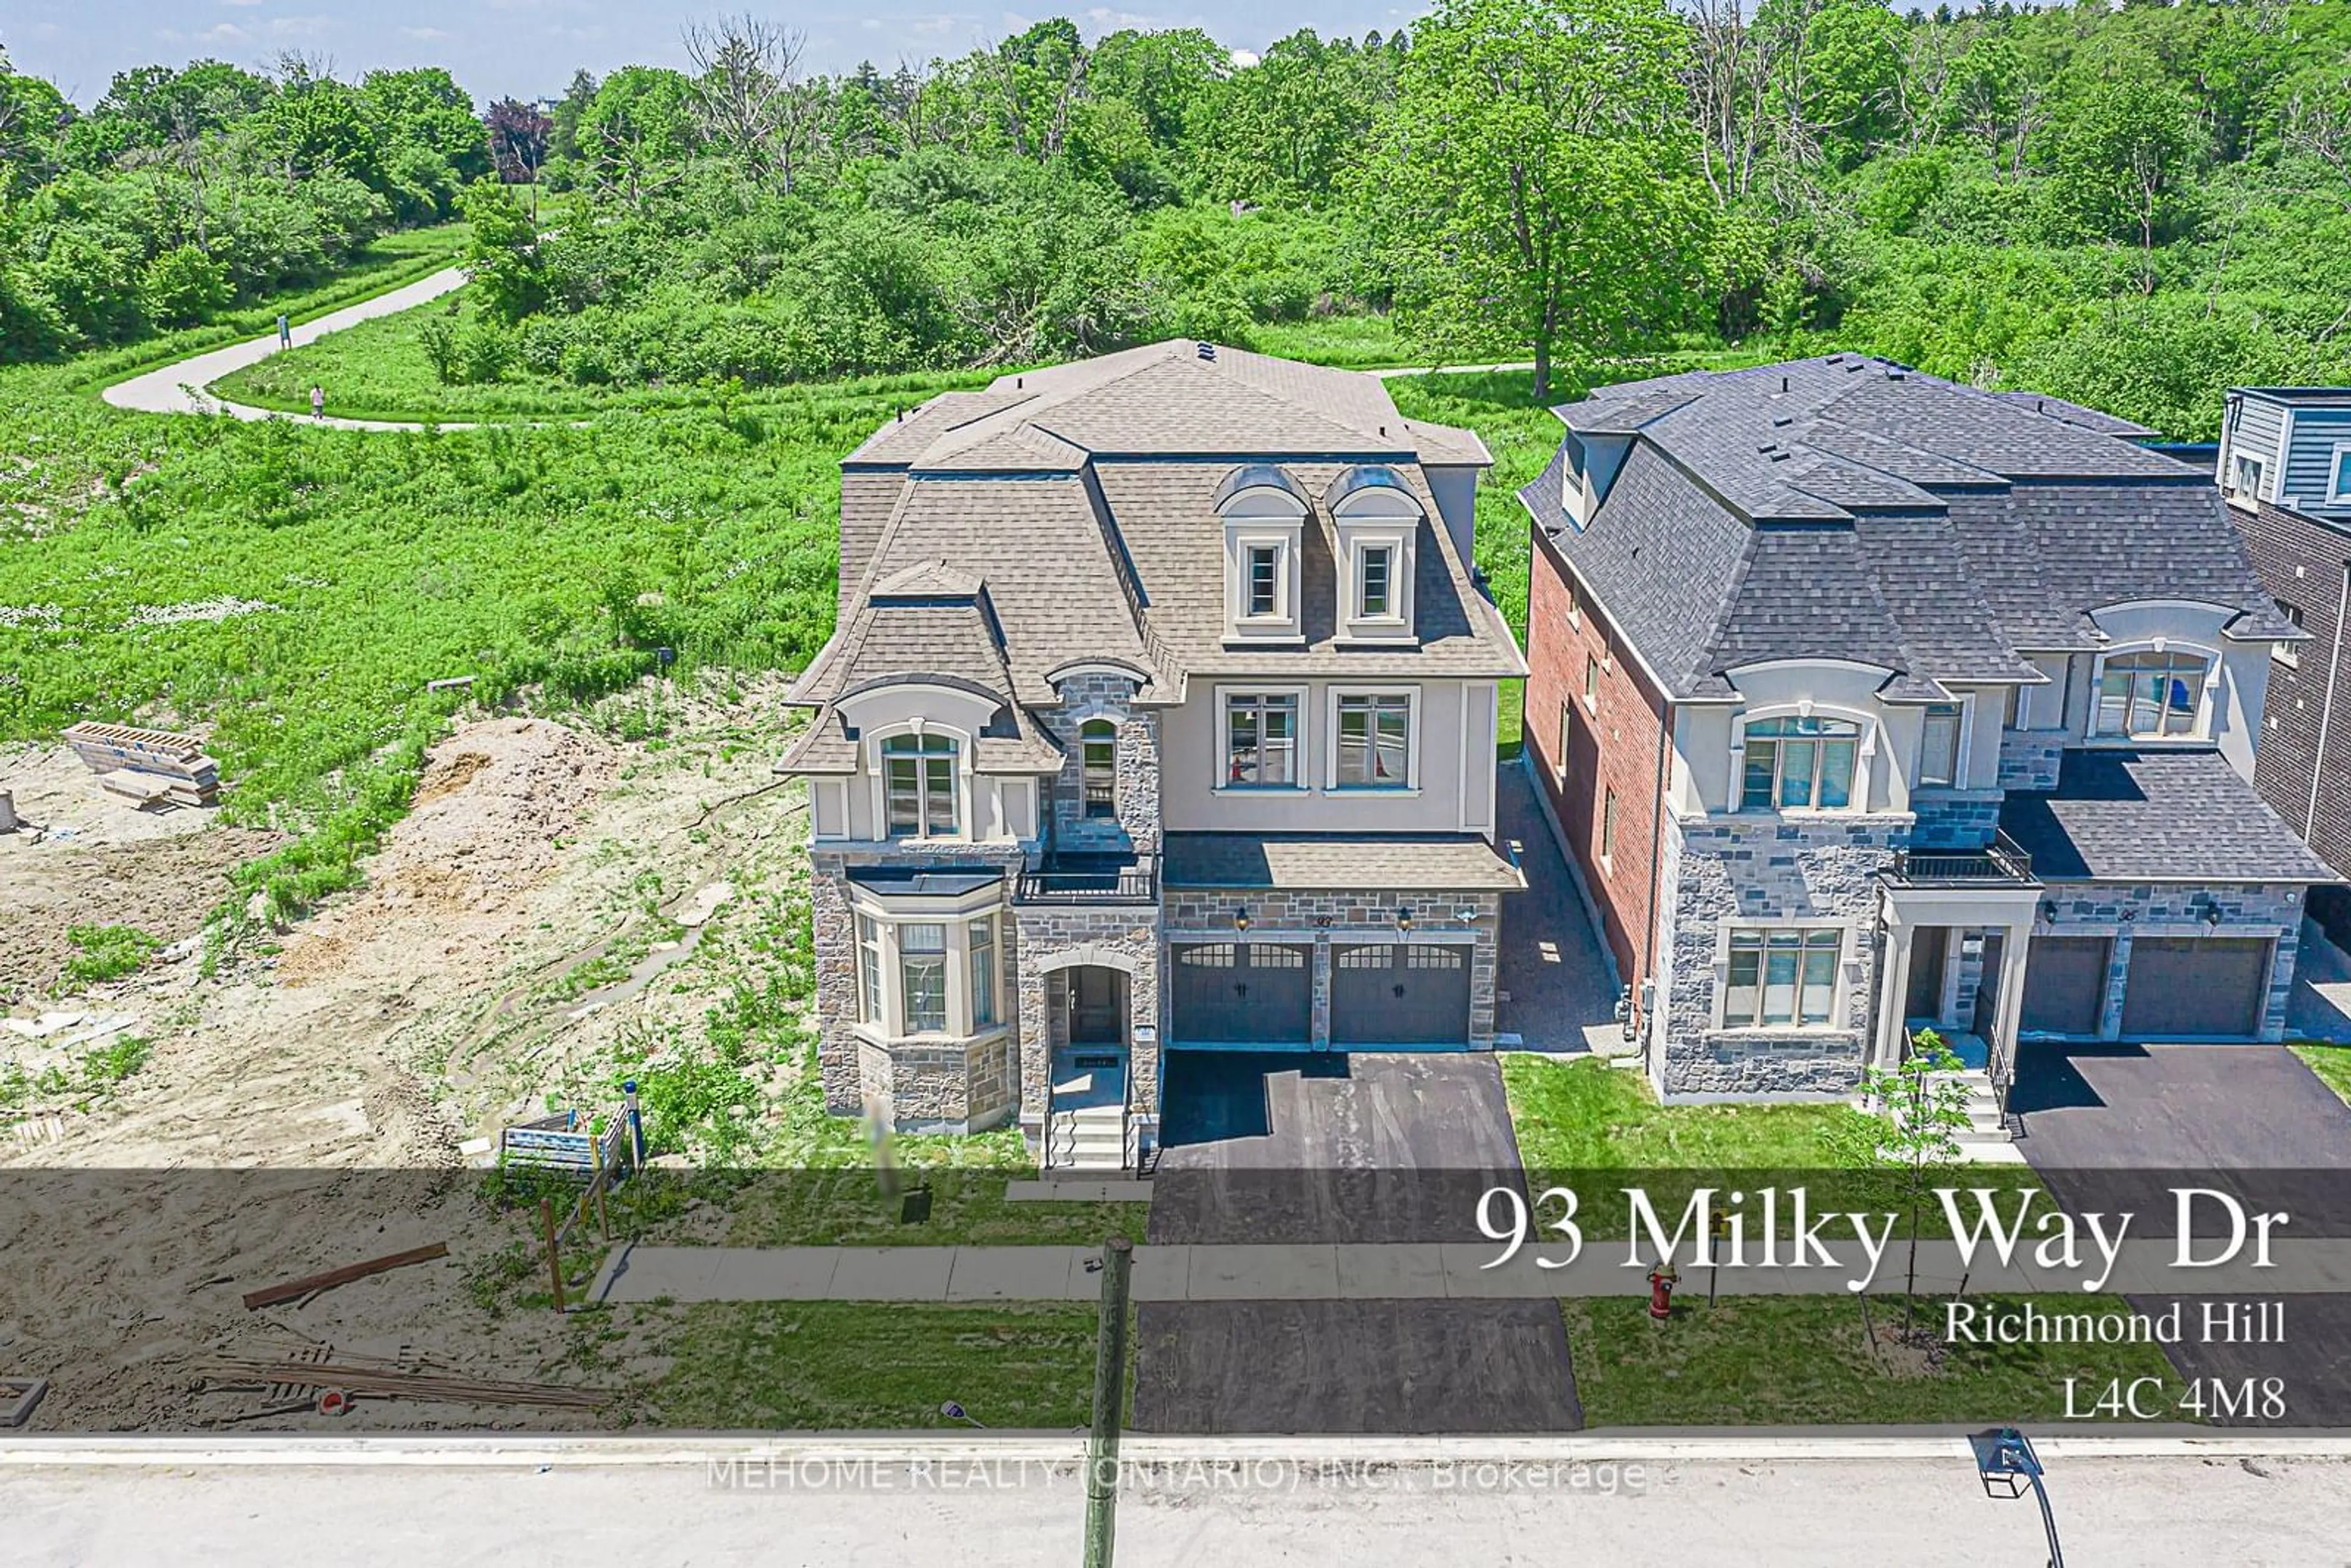 A pic from exterior of the house or condo for 93 Milky Way Dr, Richmond Hill Ontario L4C 4M8